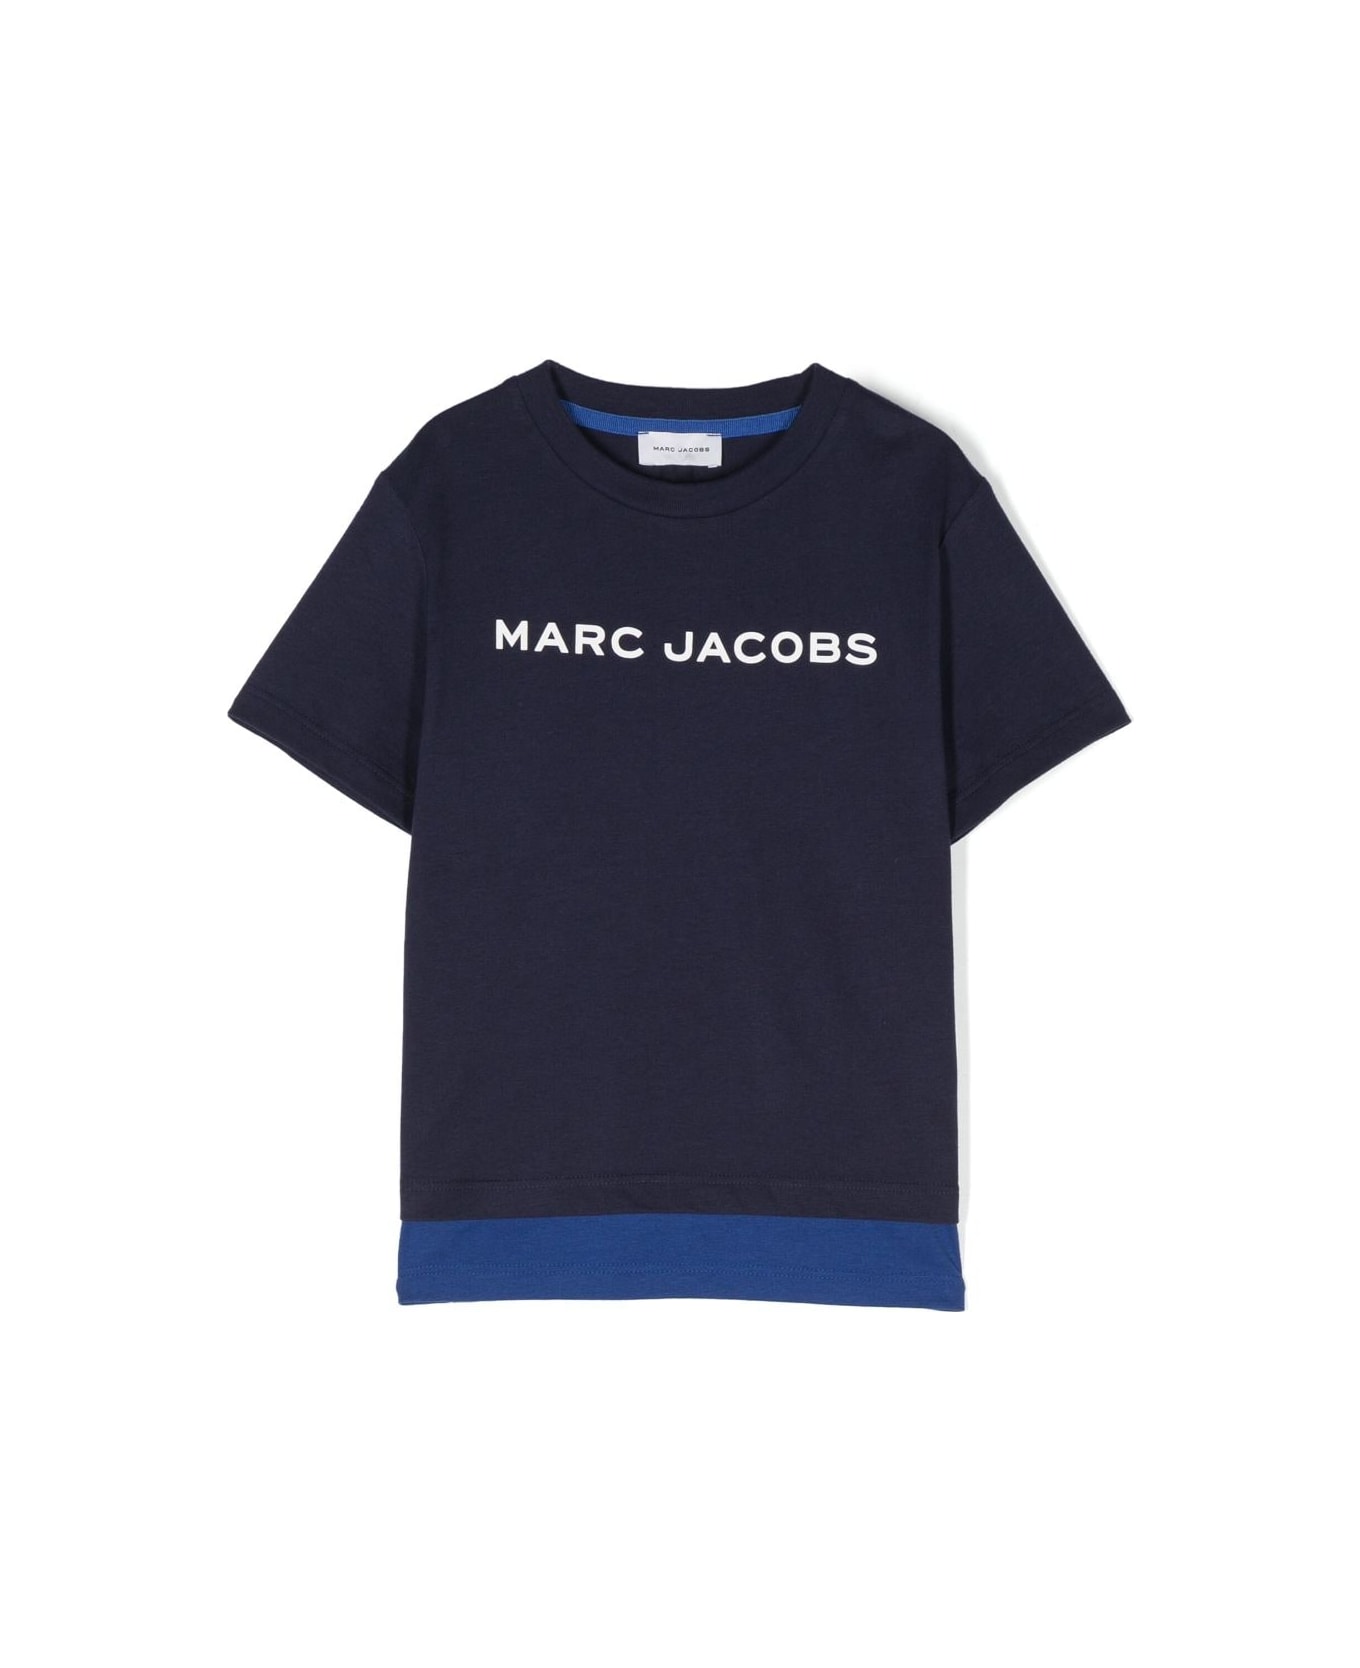 Little Marc Jacobs Marc Jacobs T-shirt Blu Con Pannelli A Contrasto In Jersey Di Cotone Bambino - Blu Tシャツ＆ポロシャツ